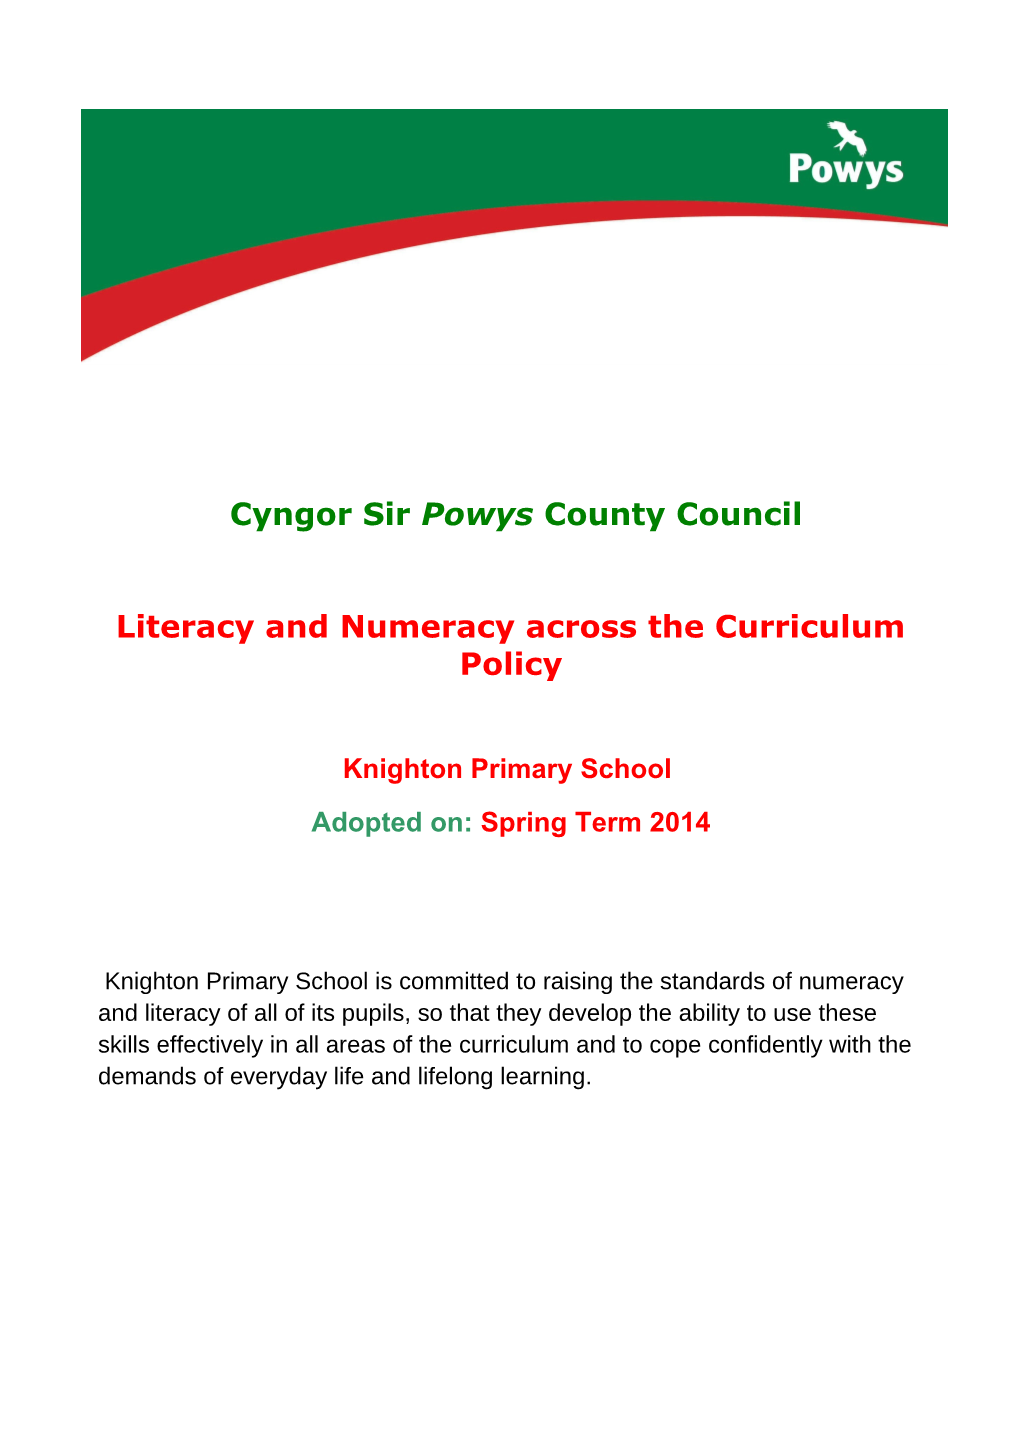 Literacy and Numeracy Across the Curriculum Policy